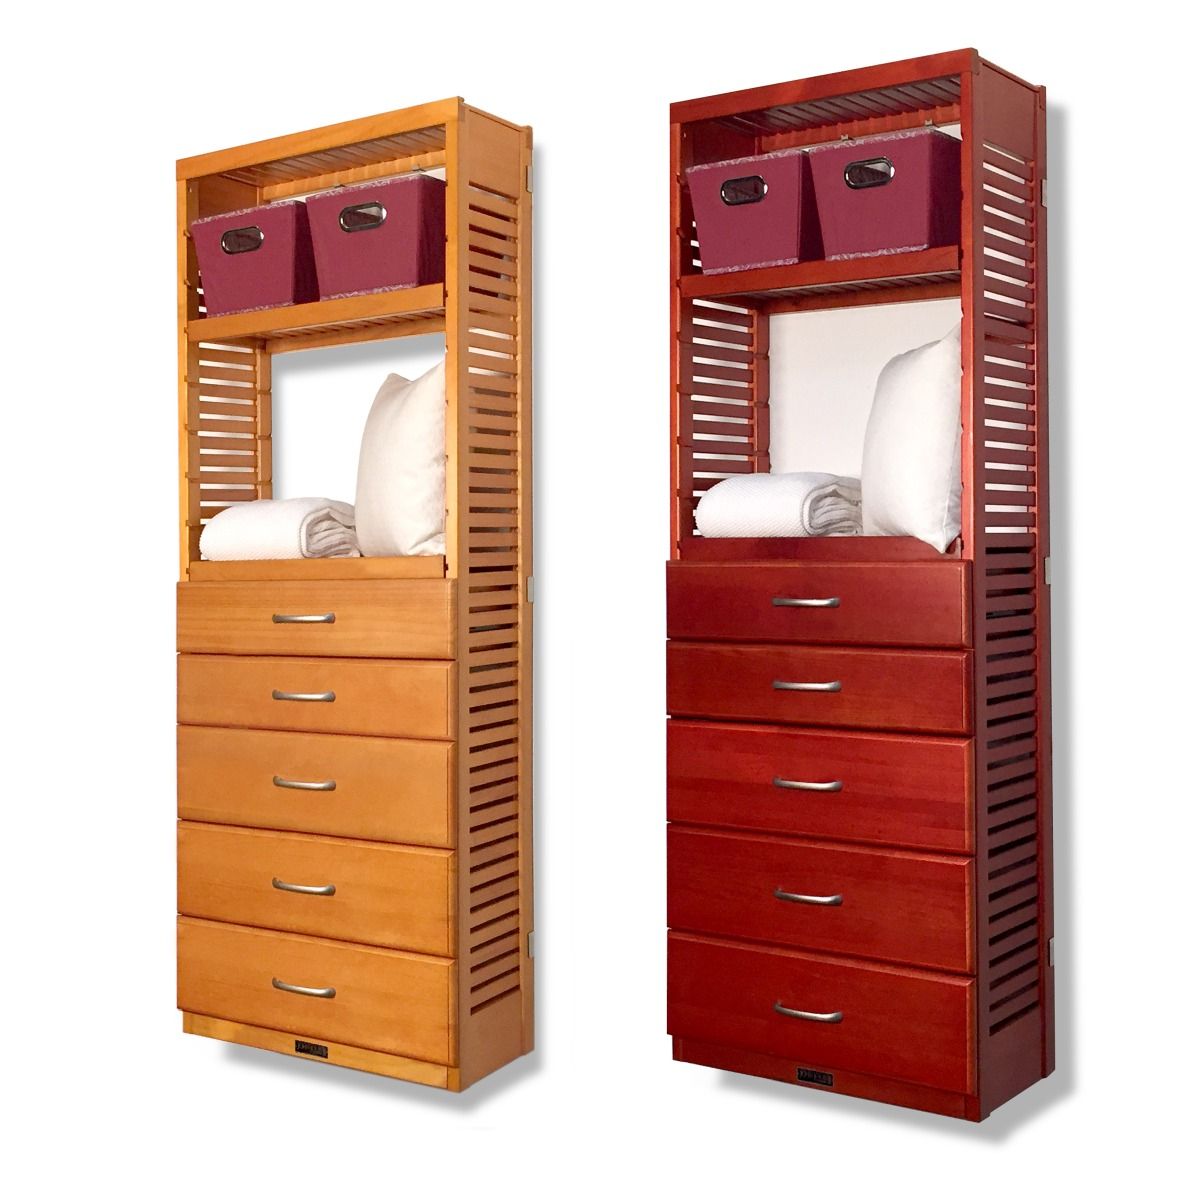 12in. Deep 6ft. Tower with drawers | John Louis Home